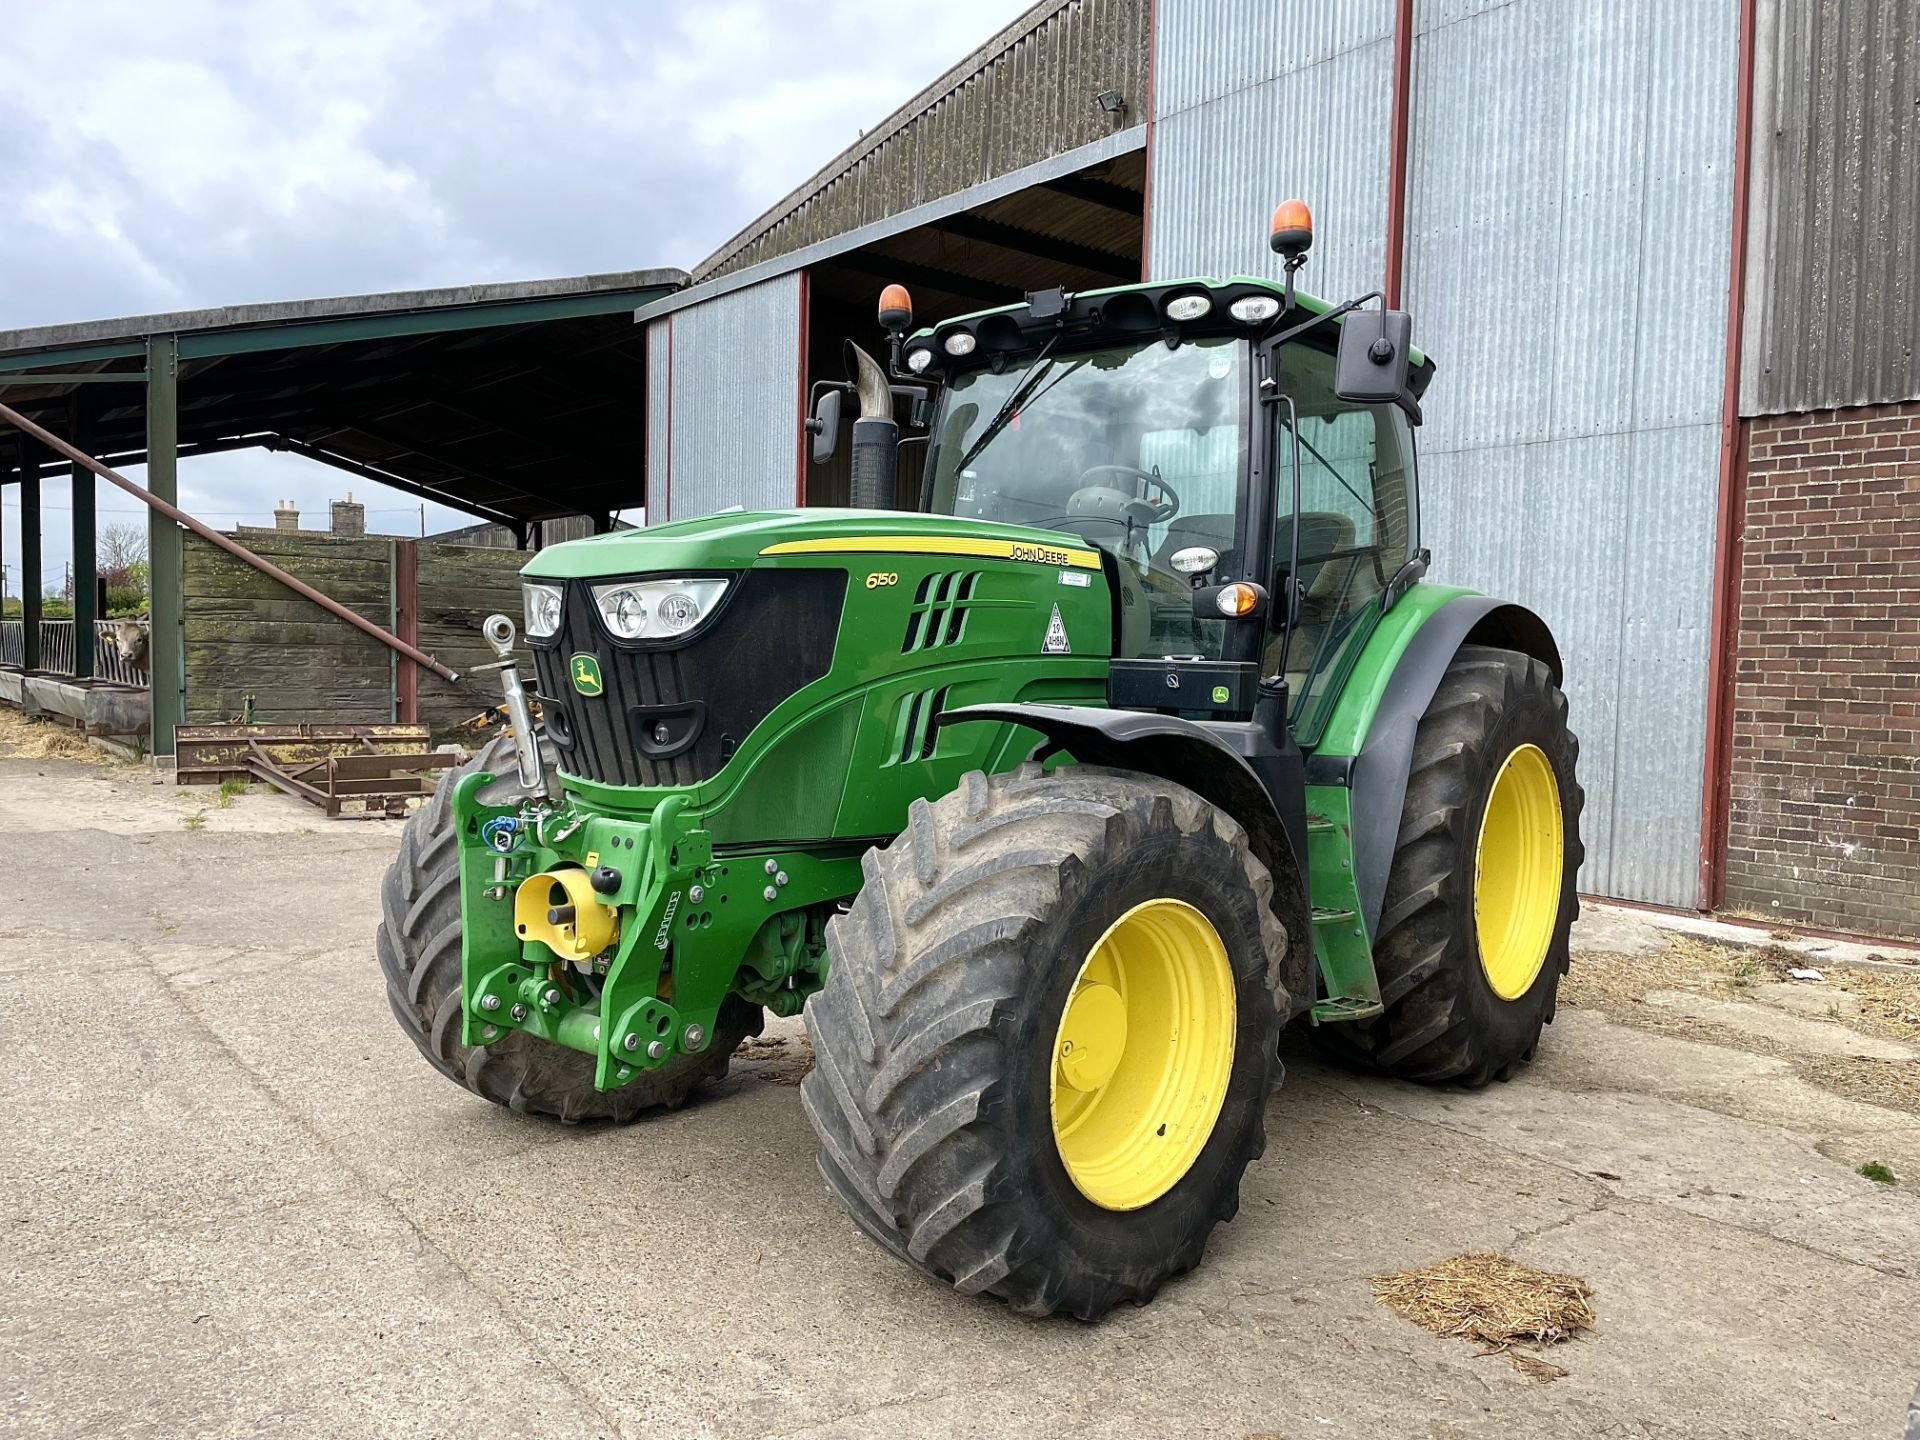 2013 John Deere 6150R 4wd Tractor, approx 6112 hours, Reg No. - Image 12 of 13